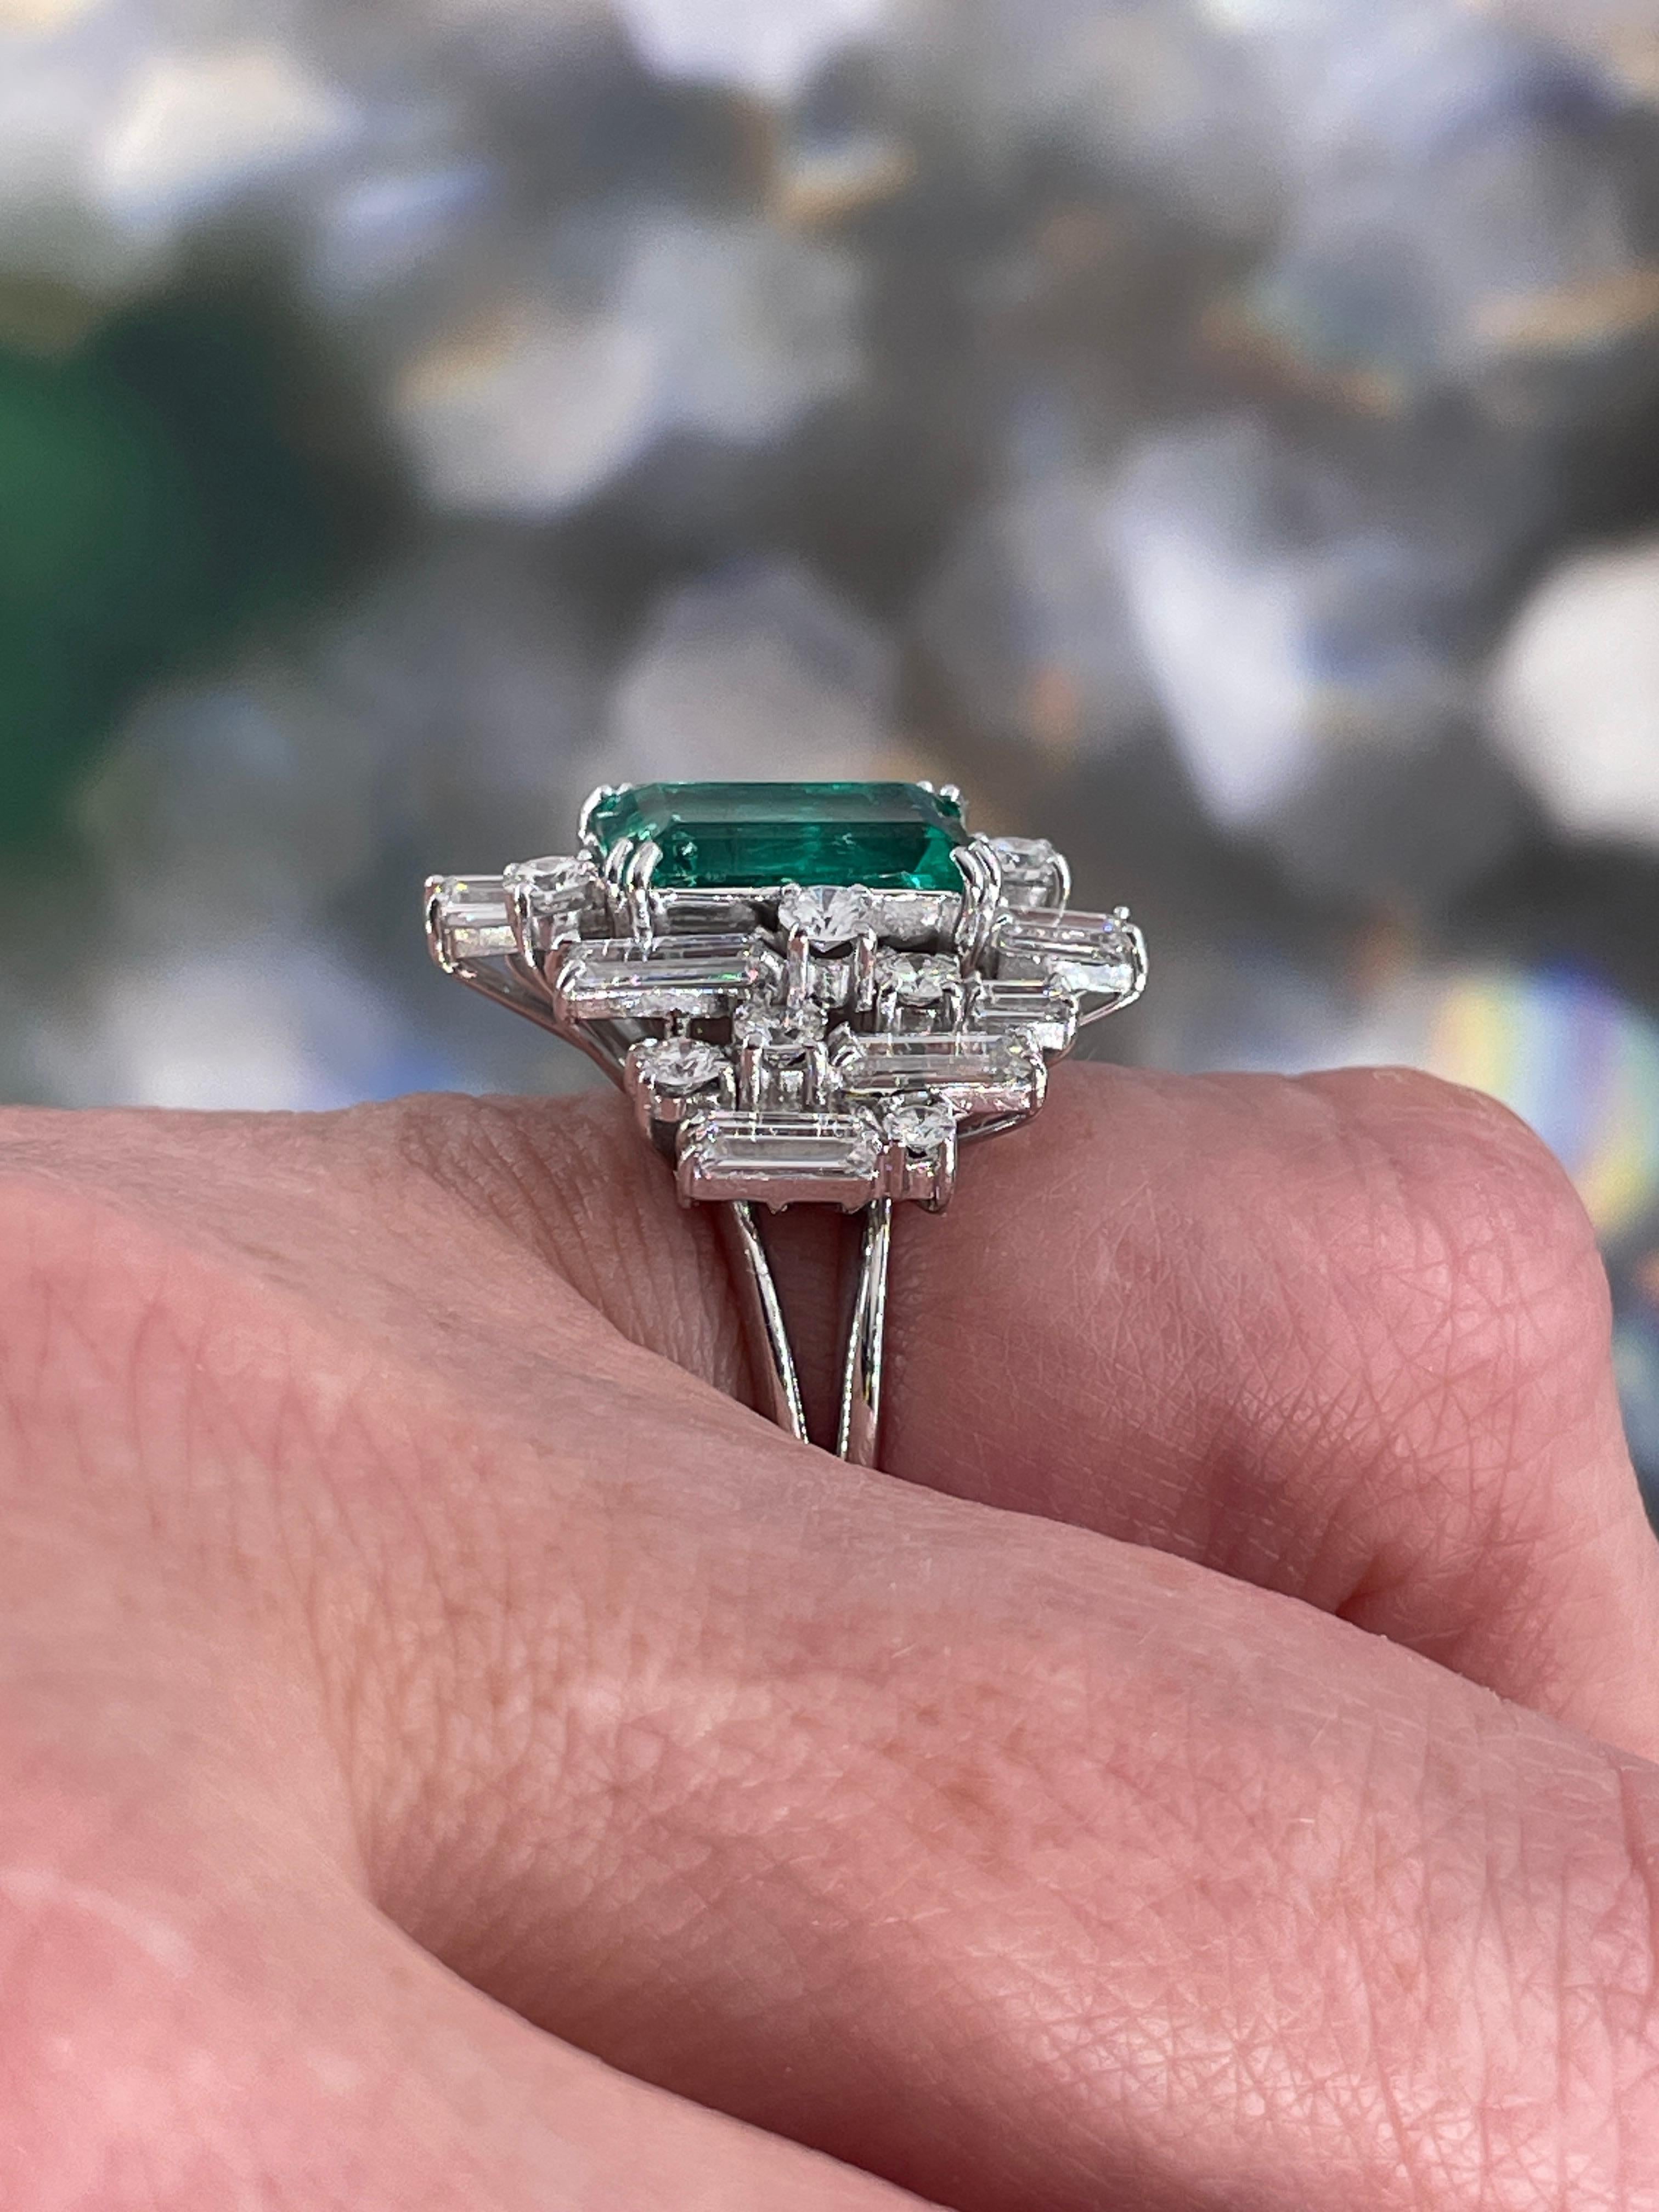 Vintage AGL 5.75cts Insignificant Colombian Green Emerald Diamond 14KW Gold Ring For Sale 3